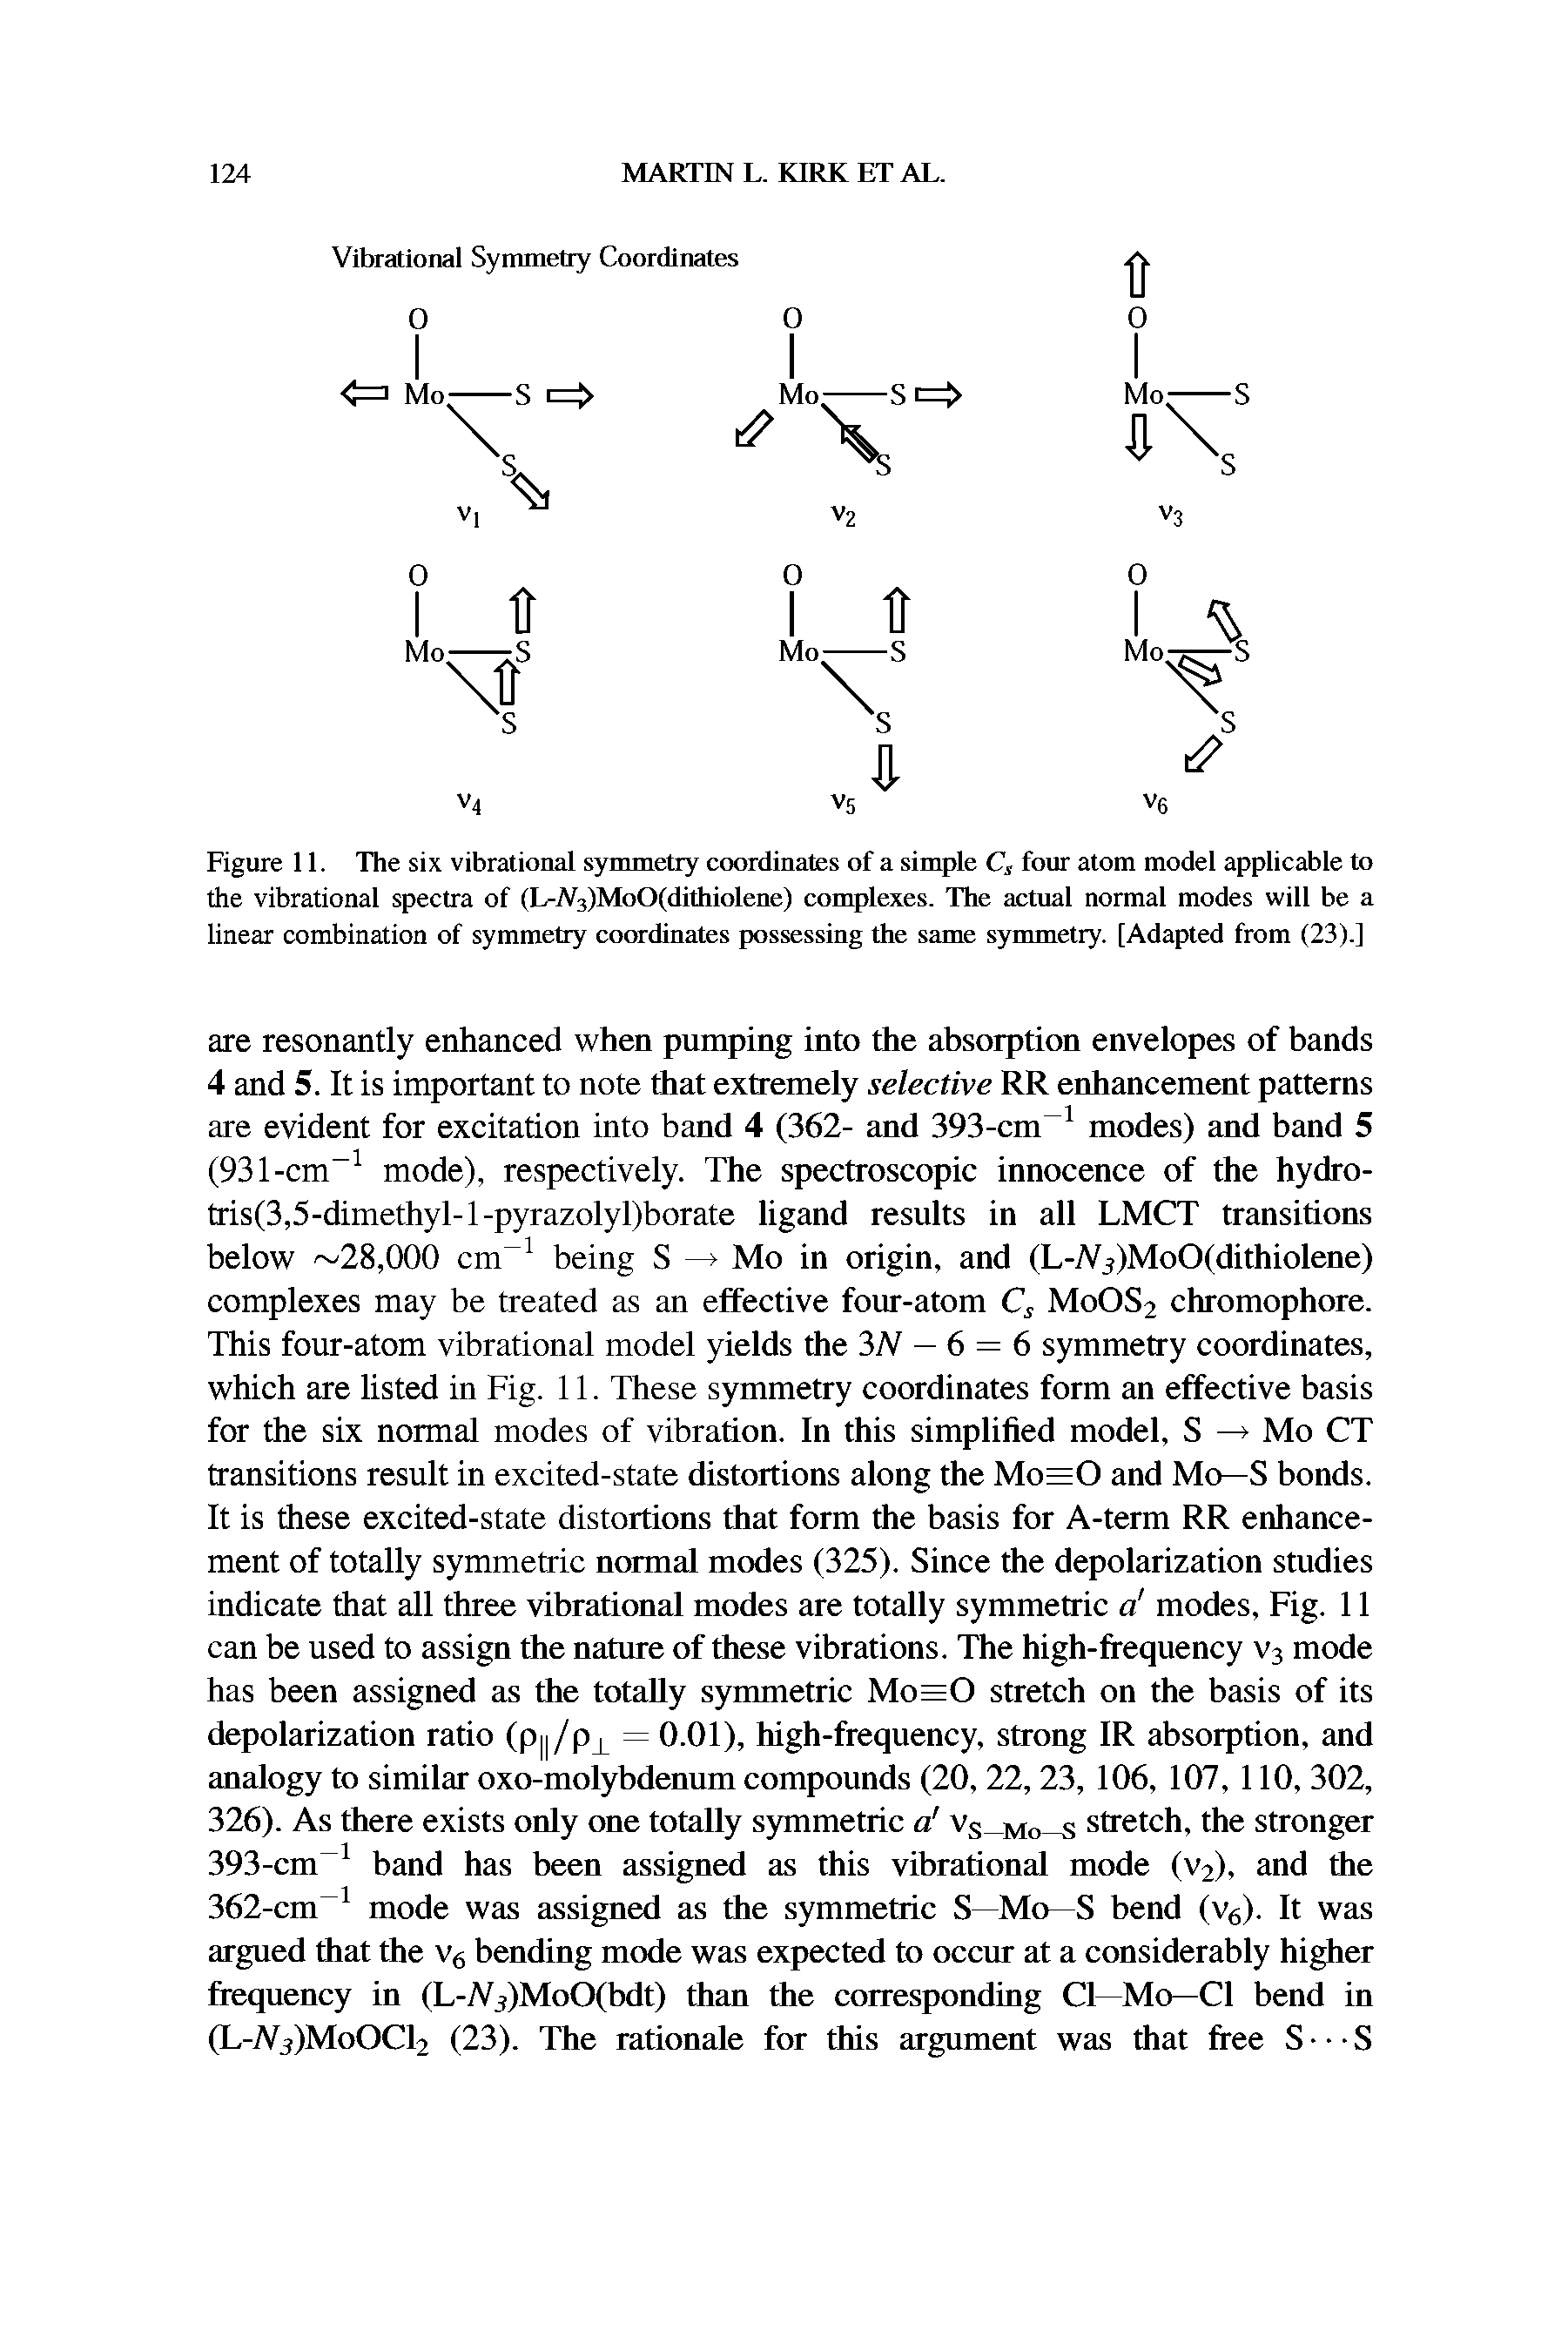 Figure 11. The six vibrational symmetry coordinates of a simple Cs four atom model applicable to the vibrational spectra of (L-Af3)MoO(dithiolene) complexes. The actual normal modes will be a linear combination of symmetry coordinates possessing the same symmetry. [Adapted from (23).]...